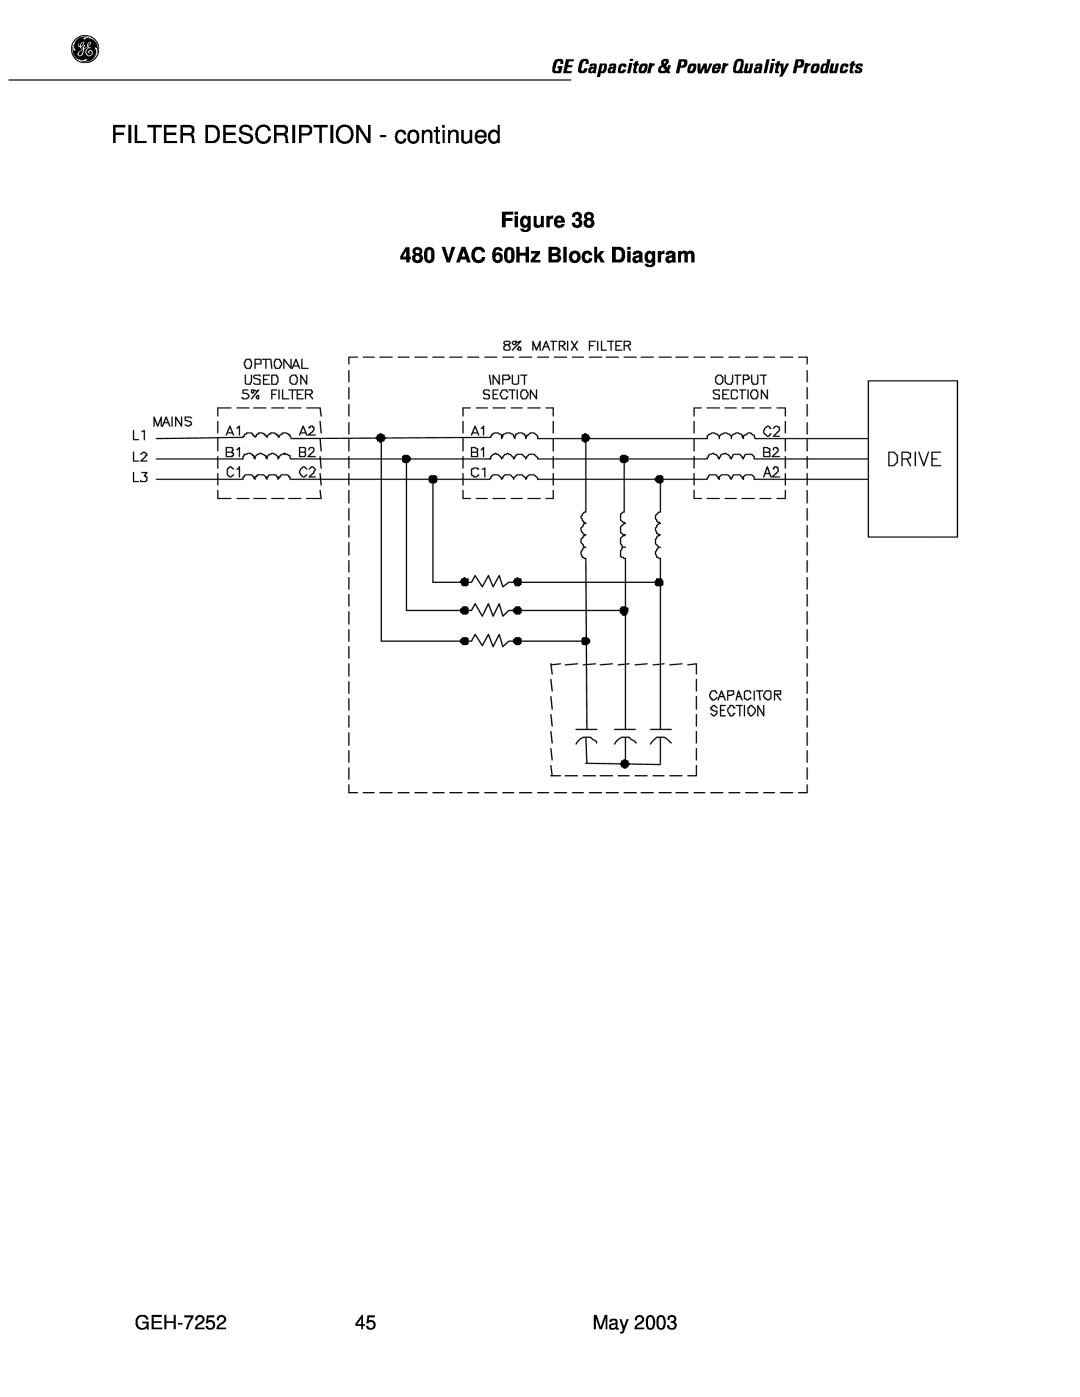 GE SERIES B 480 user manual FILTER DESCRIPTION - continued, VAC 60Hz Block Diagram, GE Capacitor & Power Quality Products 